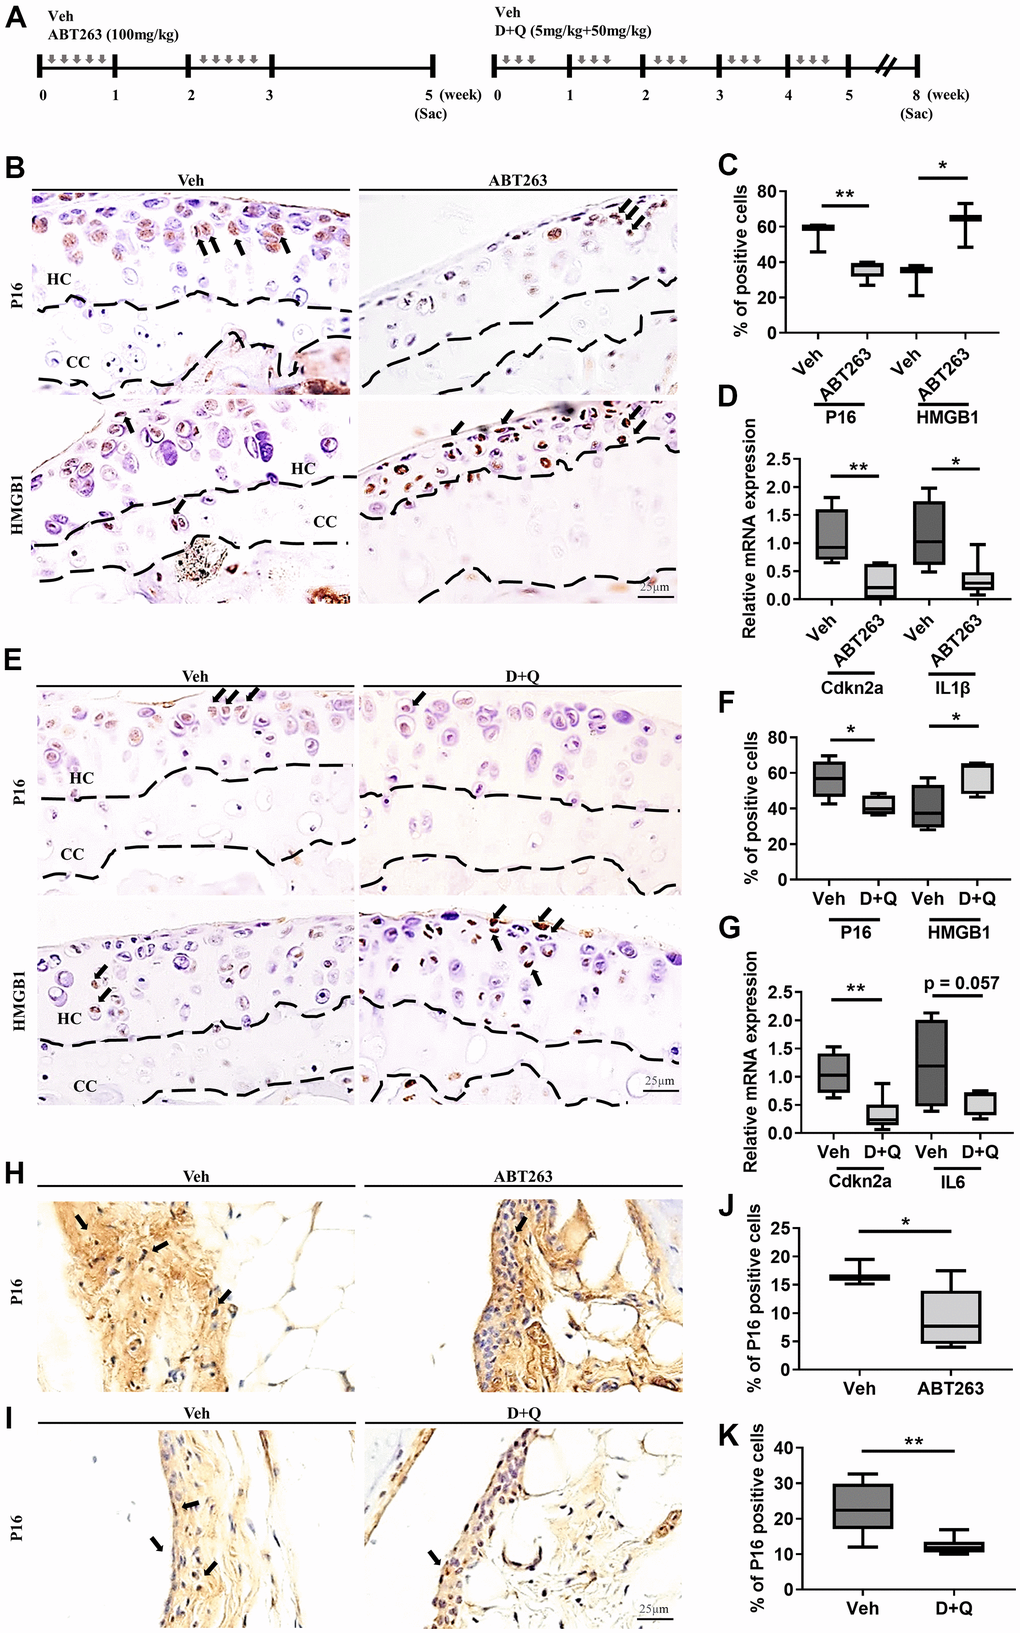 ABT263 and D+Q deplete senescent cells in articular joints of aged mice. (A) Timeline of the ABT263 and Dasatinib (D) + Quercetin (Q) treated aged mouse model of spontaneous OA. We orally administered ABT263 at 100 mg/kg or Vehicle (Veh) to 21 to 22-month-old mice five times biweekly for 4 weeks. The 21 to 22-month-old mice were given oral D + Q (5 mg/kg Dasatinib plus 50 mg/kg Quercetin) or Veh three times every week for 5 weeks. (B) Representative immunostaining images of p16 and HMGB1 + cells (arrows) in the articular cartilage of the ABT263 or Veh-treated aged mice. HC, hyaline cartilage; CC, calcified cartilage. (C) Quantification of p16 + SnCs and non-SnCs positive for nuclear HMGB1 in the articular cartilage (n = 3 mice for Veh, n = 5 mice for ABT263). (D) mRNA expression levels of Cdkn2a and IL1β are validated by qRT-PCR analysis in the aged mice administered ABT263 or Veh (n = 4 for Veh, n = 7 for ABT263). (E) Representative immunostaining for p16 and HMGB1 positive cells (arrows) in the articular cartilage of D+Q or Veh treated aged mice. (F) Quantification of p16 and HMGB1 + cells in the articular cartilage (n = 5 per group). (G) Quantification of mRNA levels for Cdkn2a and IL6 by qRT-PCR in the joints of D+Q or Veh-treated aged mice (n = 4 for Veh, n = 7 for D+Q). Representative images of immunostaining for p16 in the synovium of (H) ABT263 or Veh-treated or (I) D+Q or Veh-treated in the articular knee joint of the aged mice. Percentage of p16+ cells in the synovial membrane of (J) ABT263 or Veh-treated (n = 3 for Veh, n = 6 for ABT263) or (K) D+Q or Veh-treated mice (n = 5 for Veh, n = 6 for D+Q). Whisker plots represent the 10th and 90th percentiles, and the line corresponds to the median. * p 